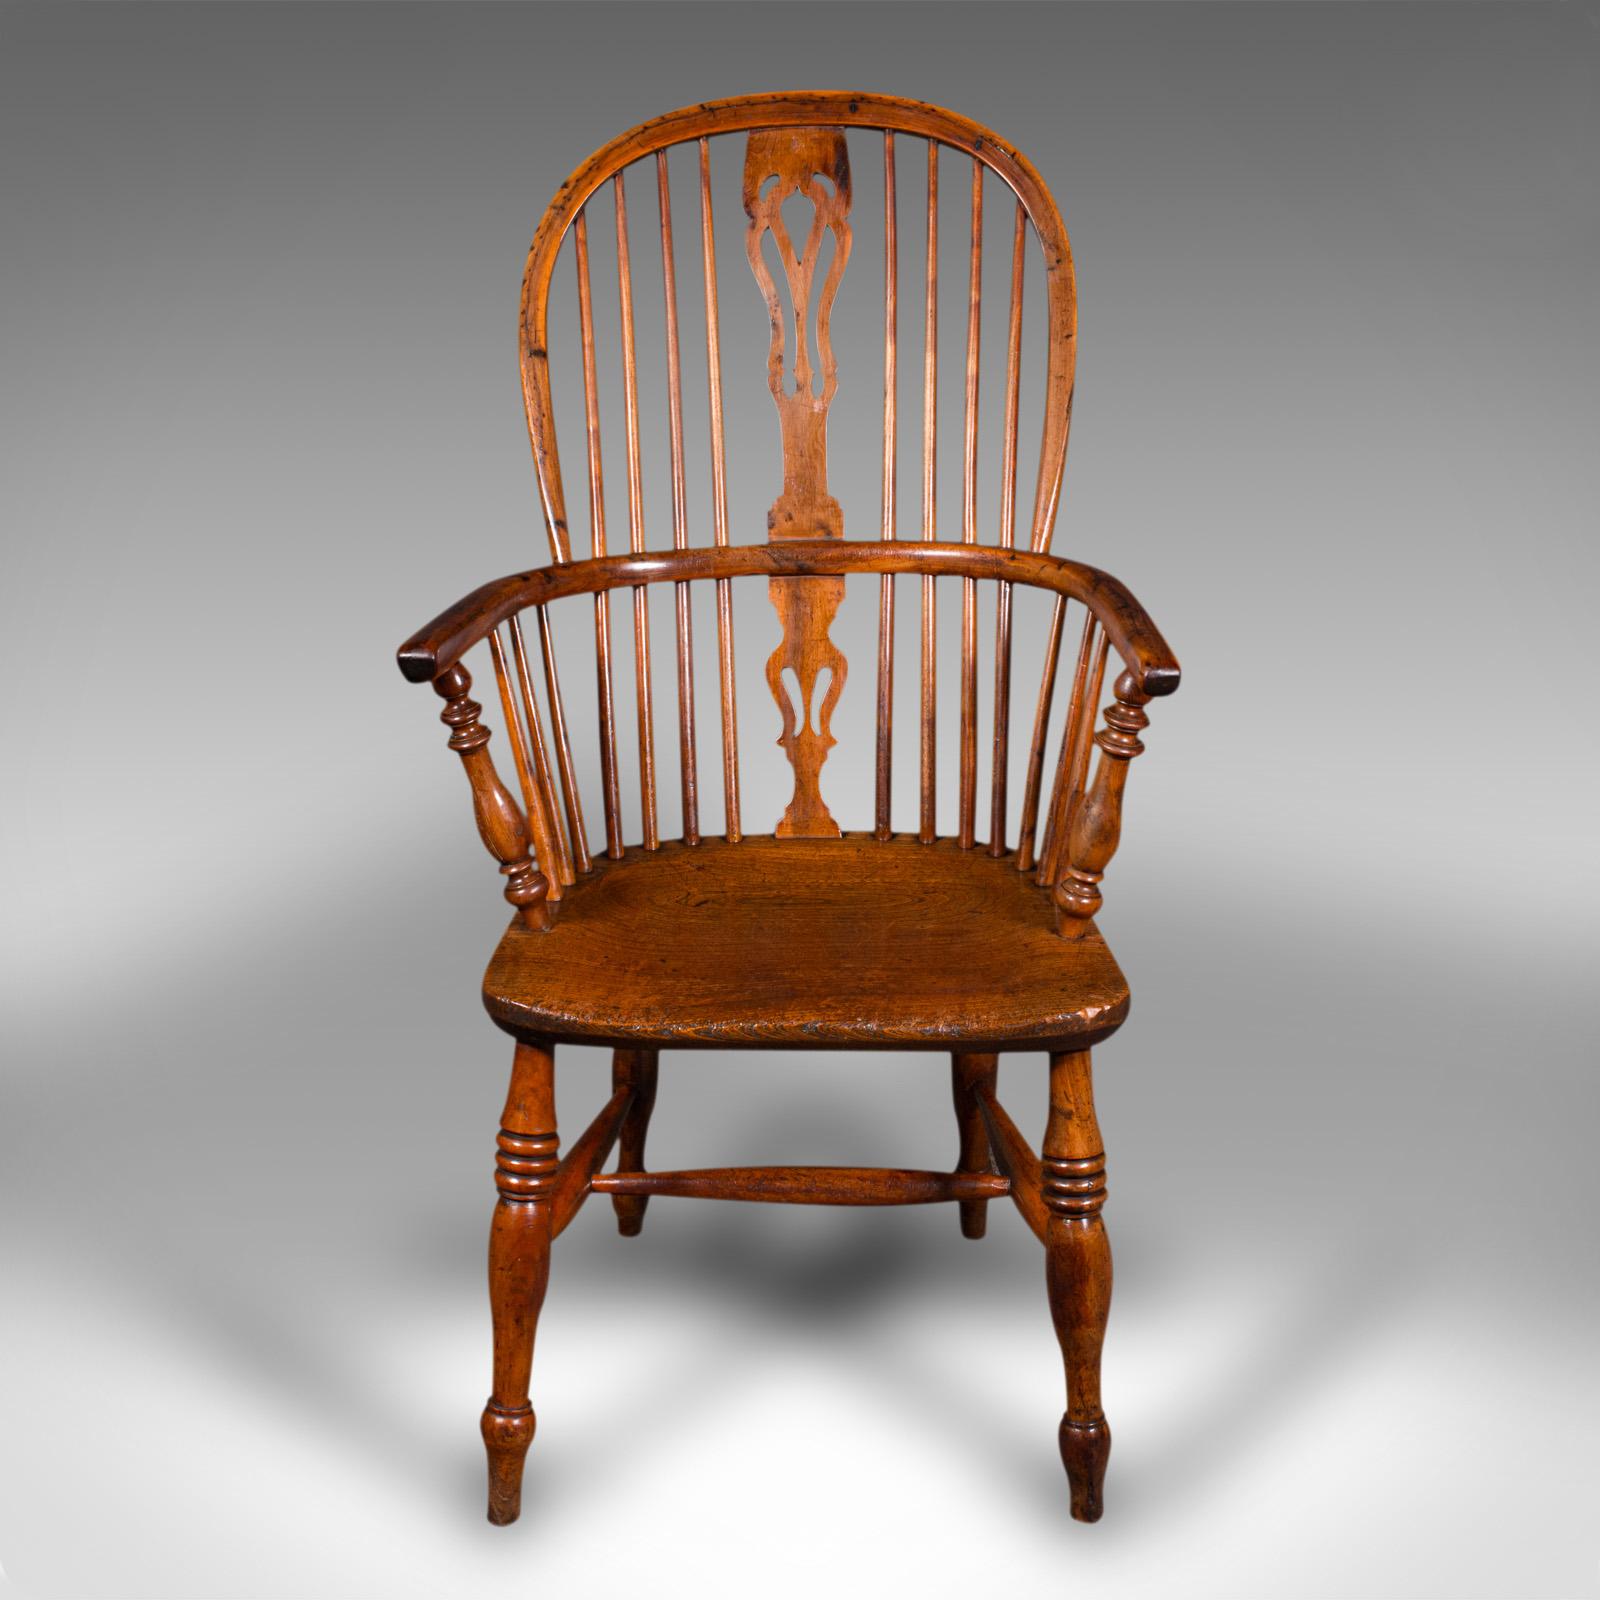 This is an antique Windsor chair. An English, elm and yew elbow or armchair, dating to the Victorian period, circa 1850.

Country house appeal, in distinctive 'Double Windsor' form
Displaying a desirable aged patina and in good order
Elm and yew